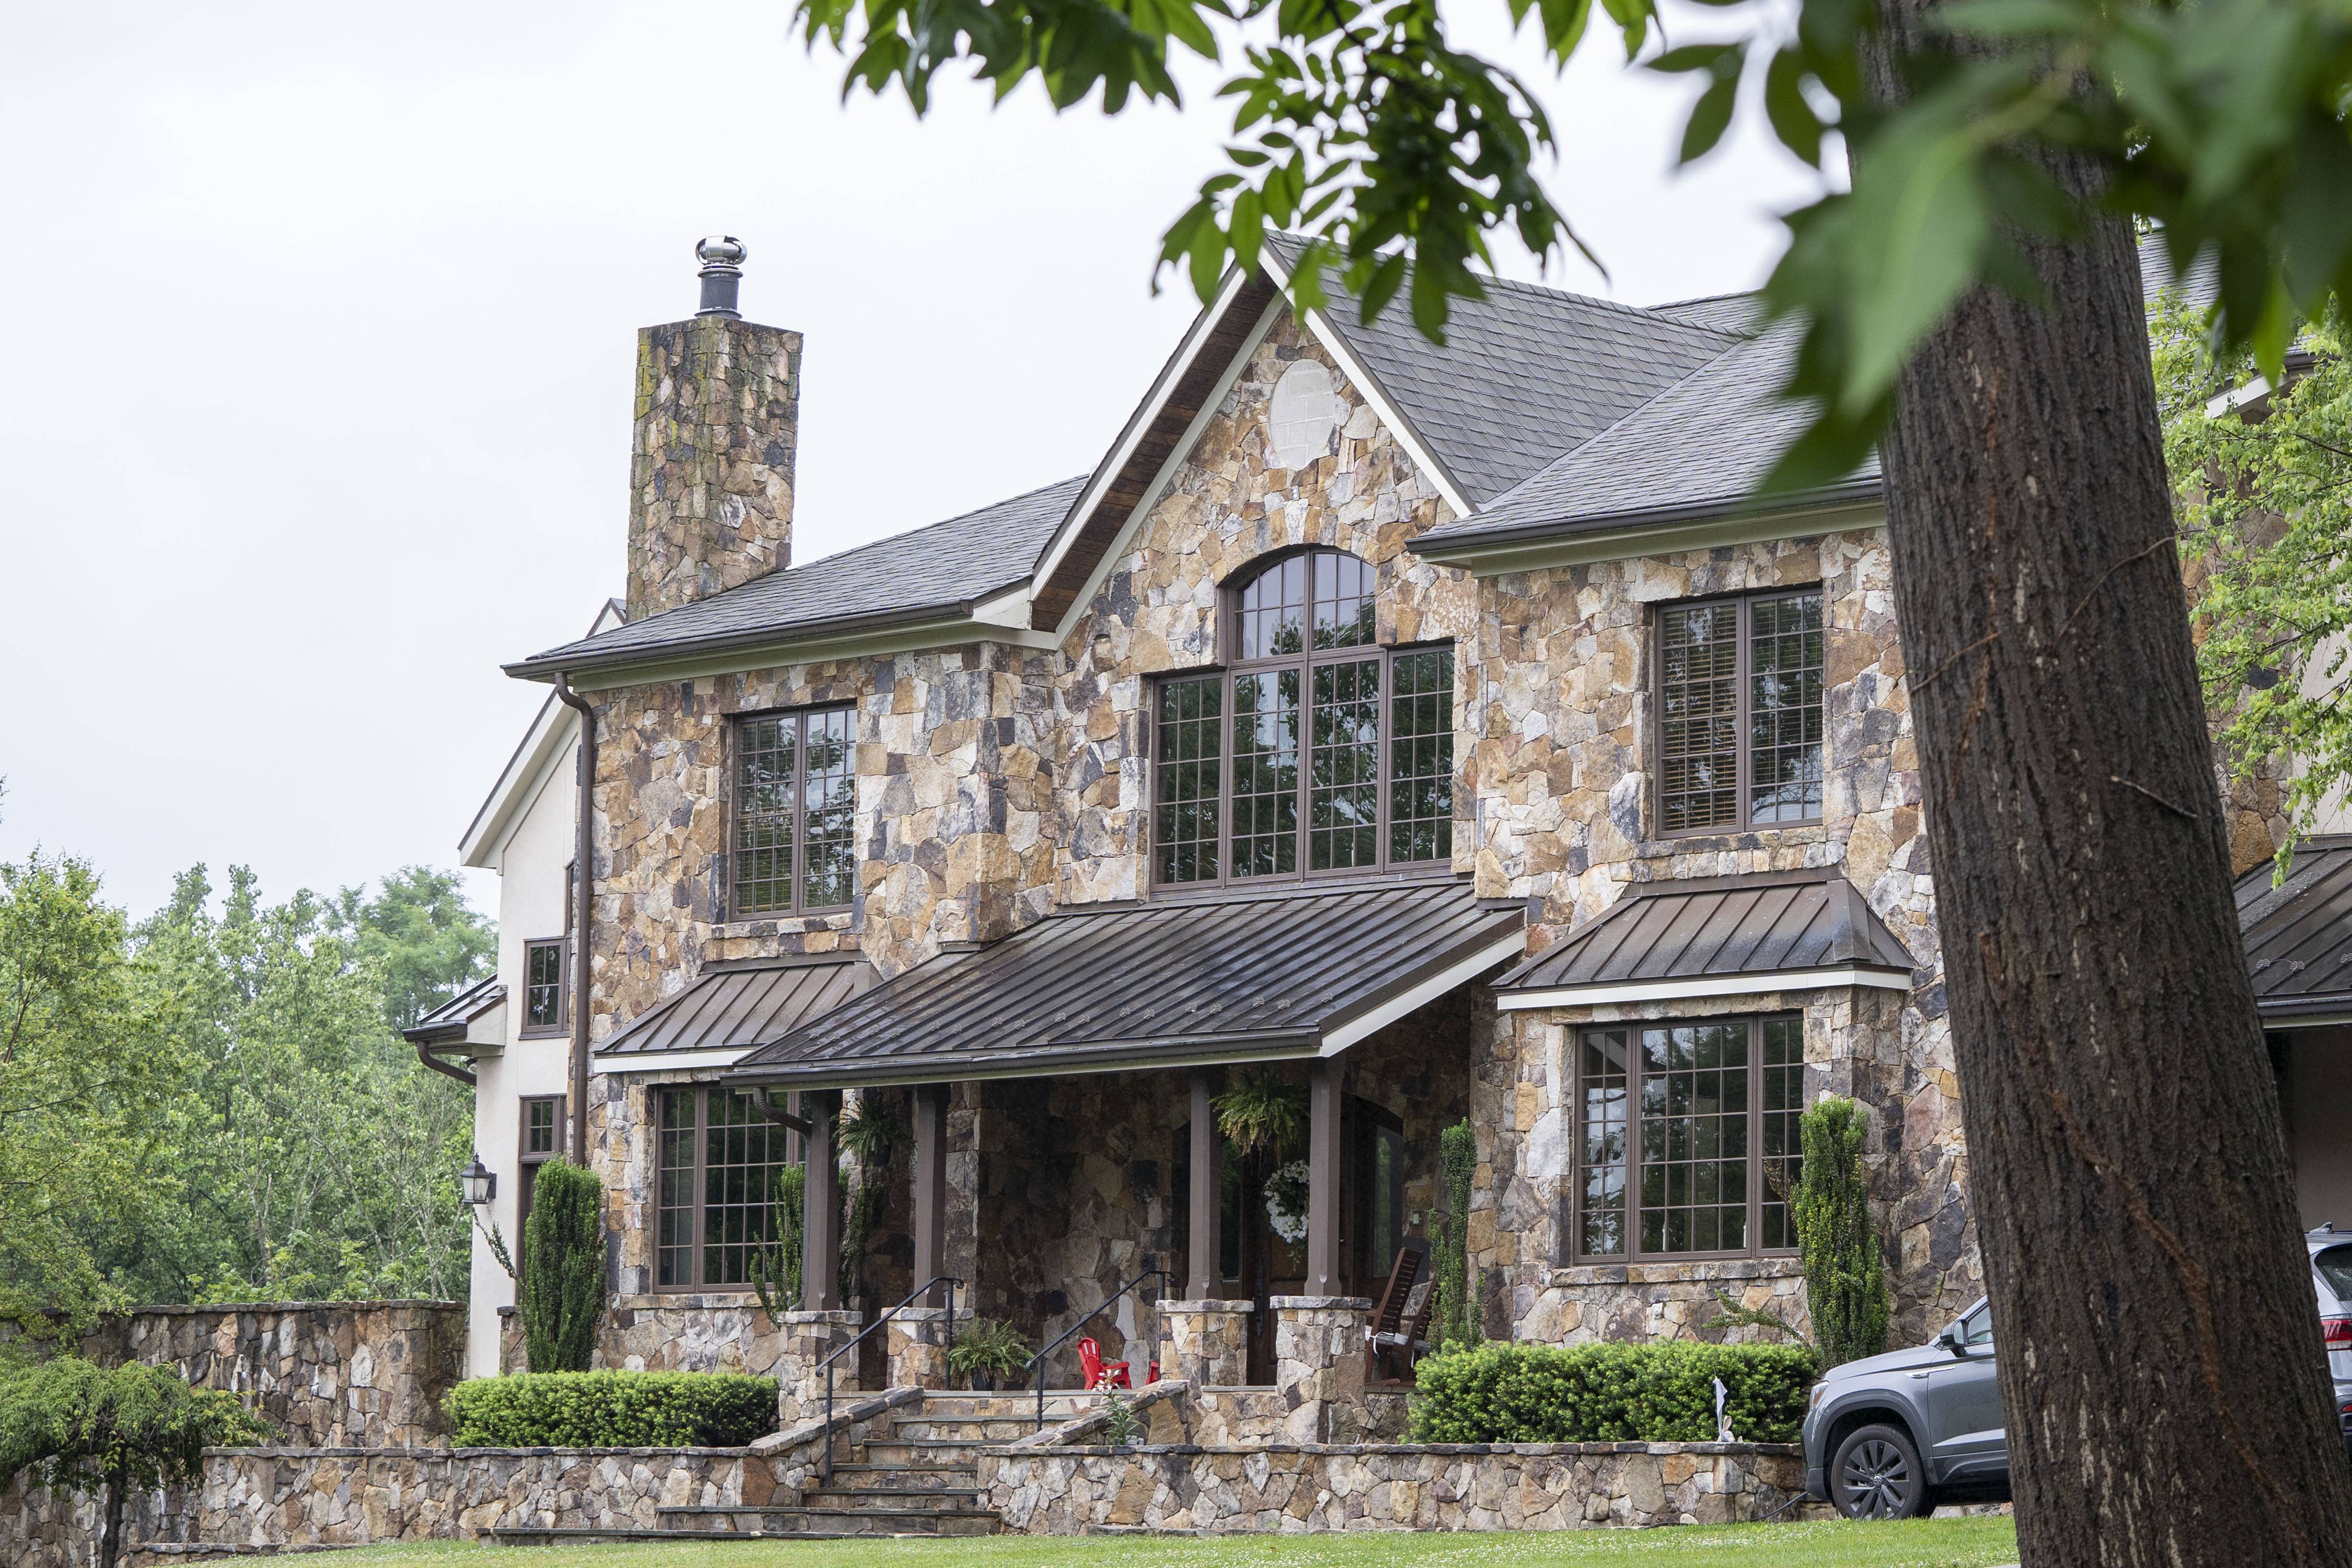 Pictured is the 10,000-square-foot mansion in Baltimore County that sovereign citizens took over.